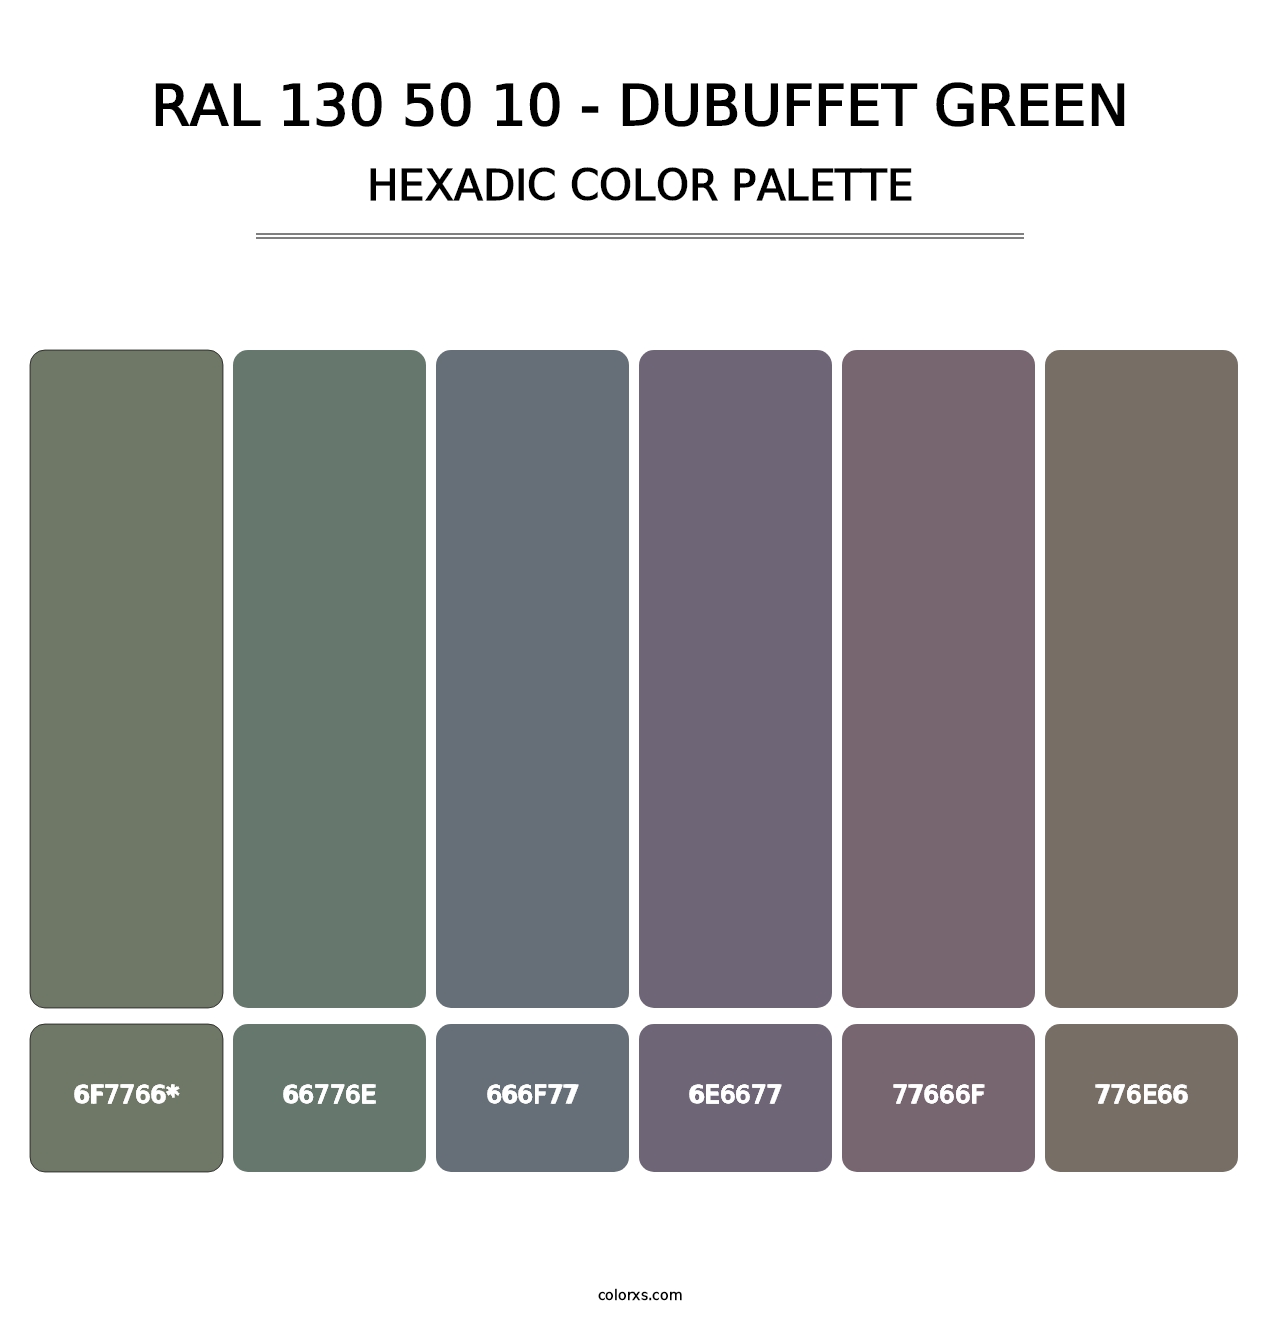 RAL 130 50 10 - Dubuffet Green - Hexadic Color Palette